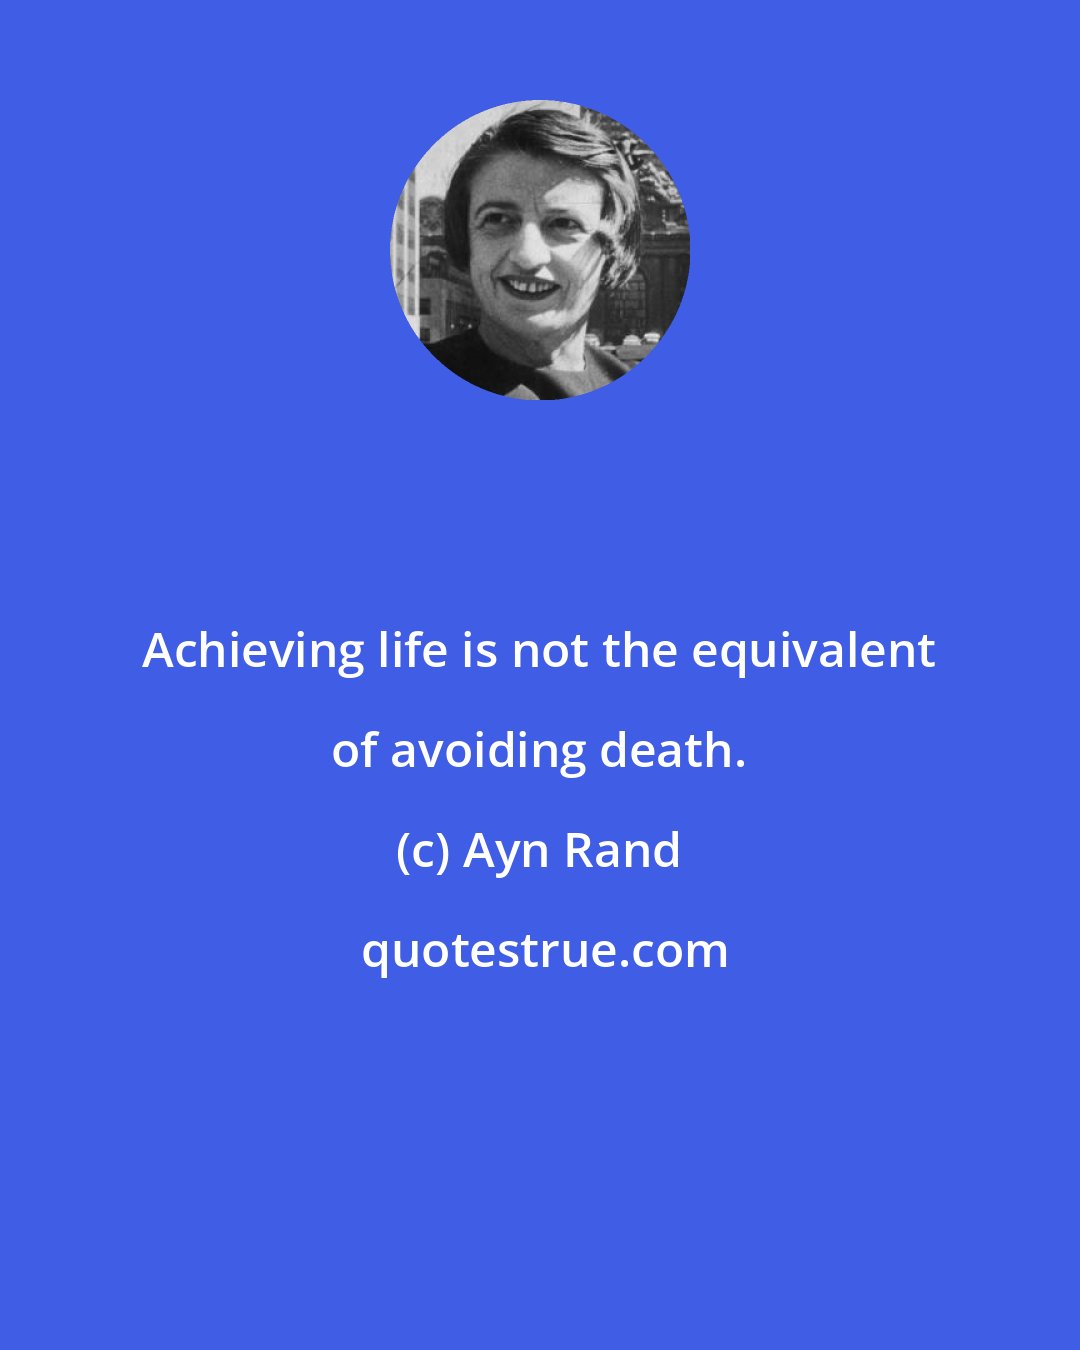 Ayn Rand: Achieving life is not the equivalent of avoiding death.